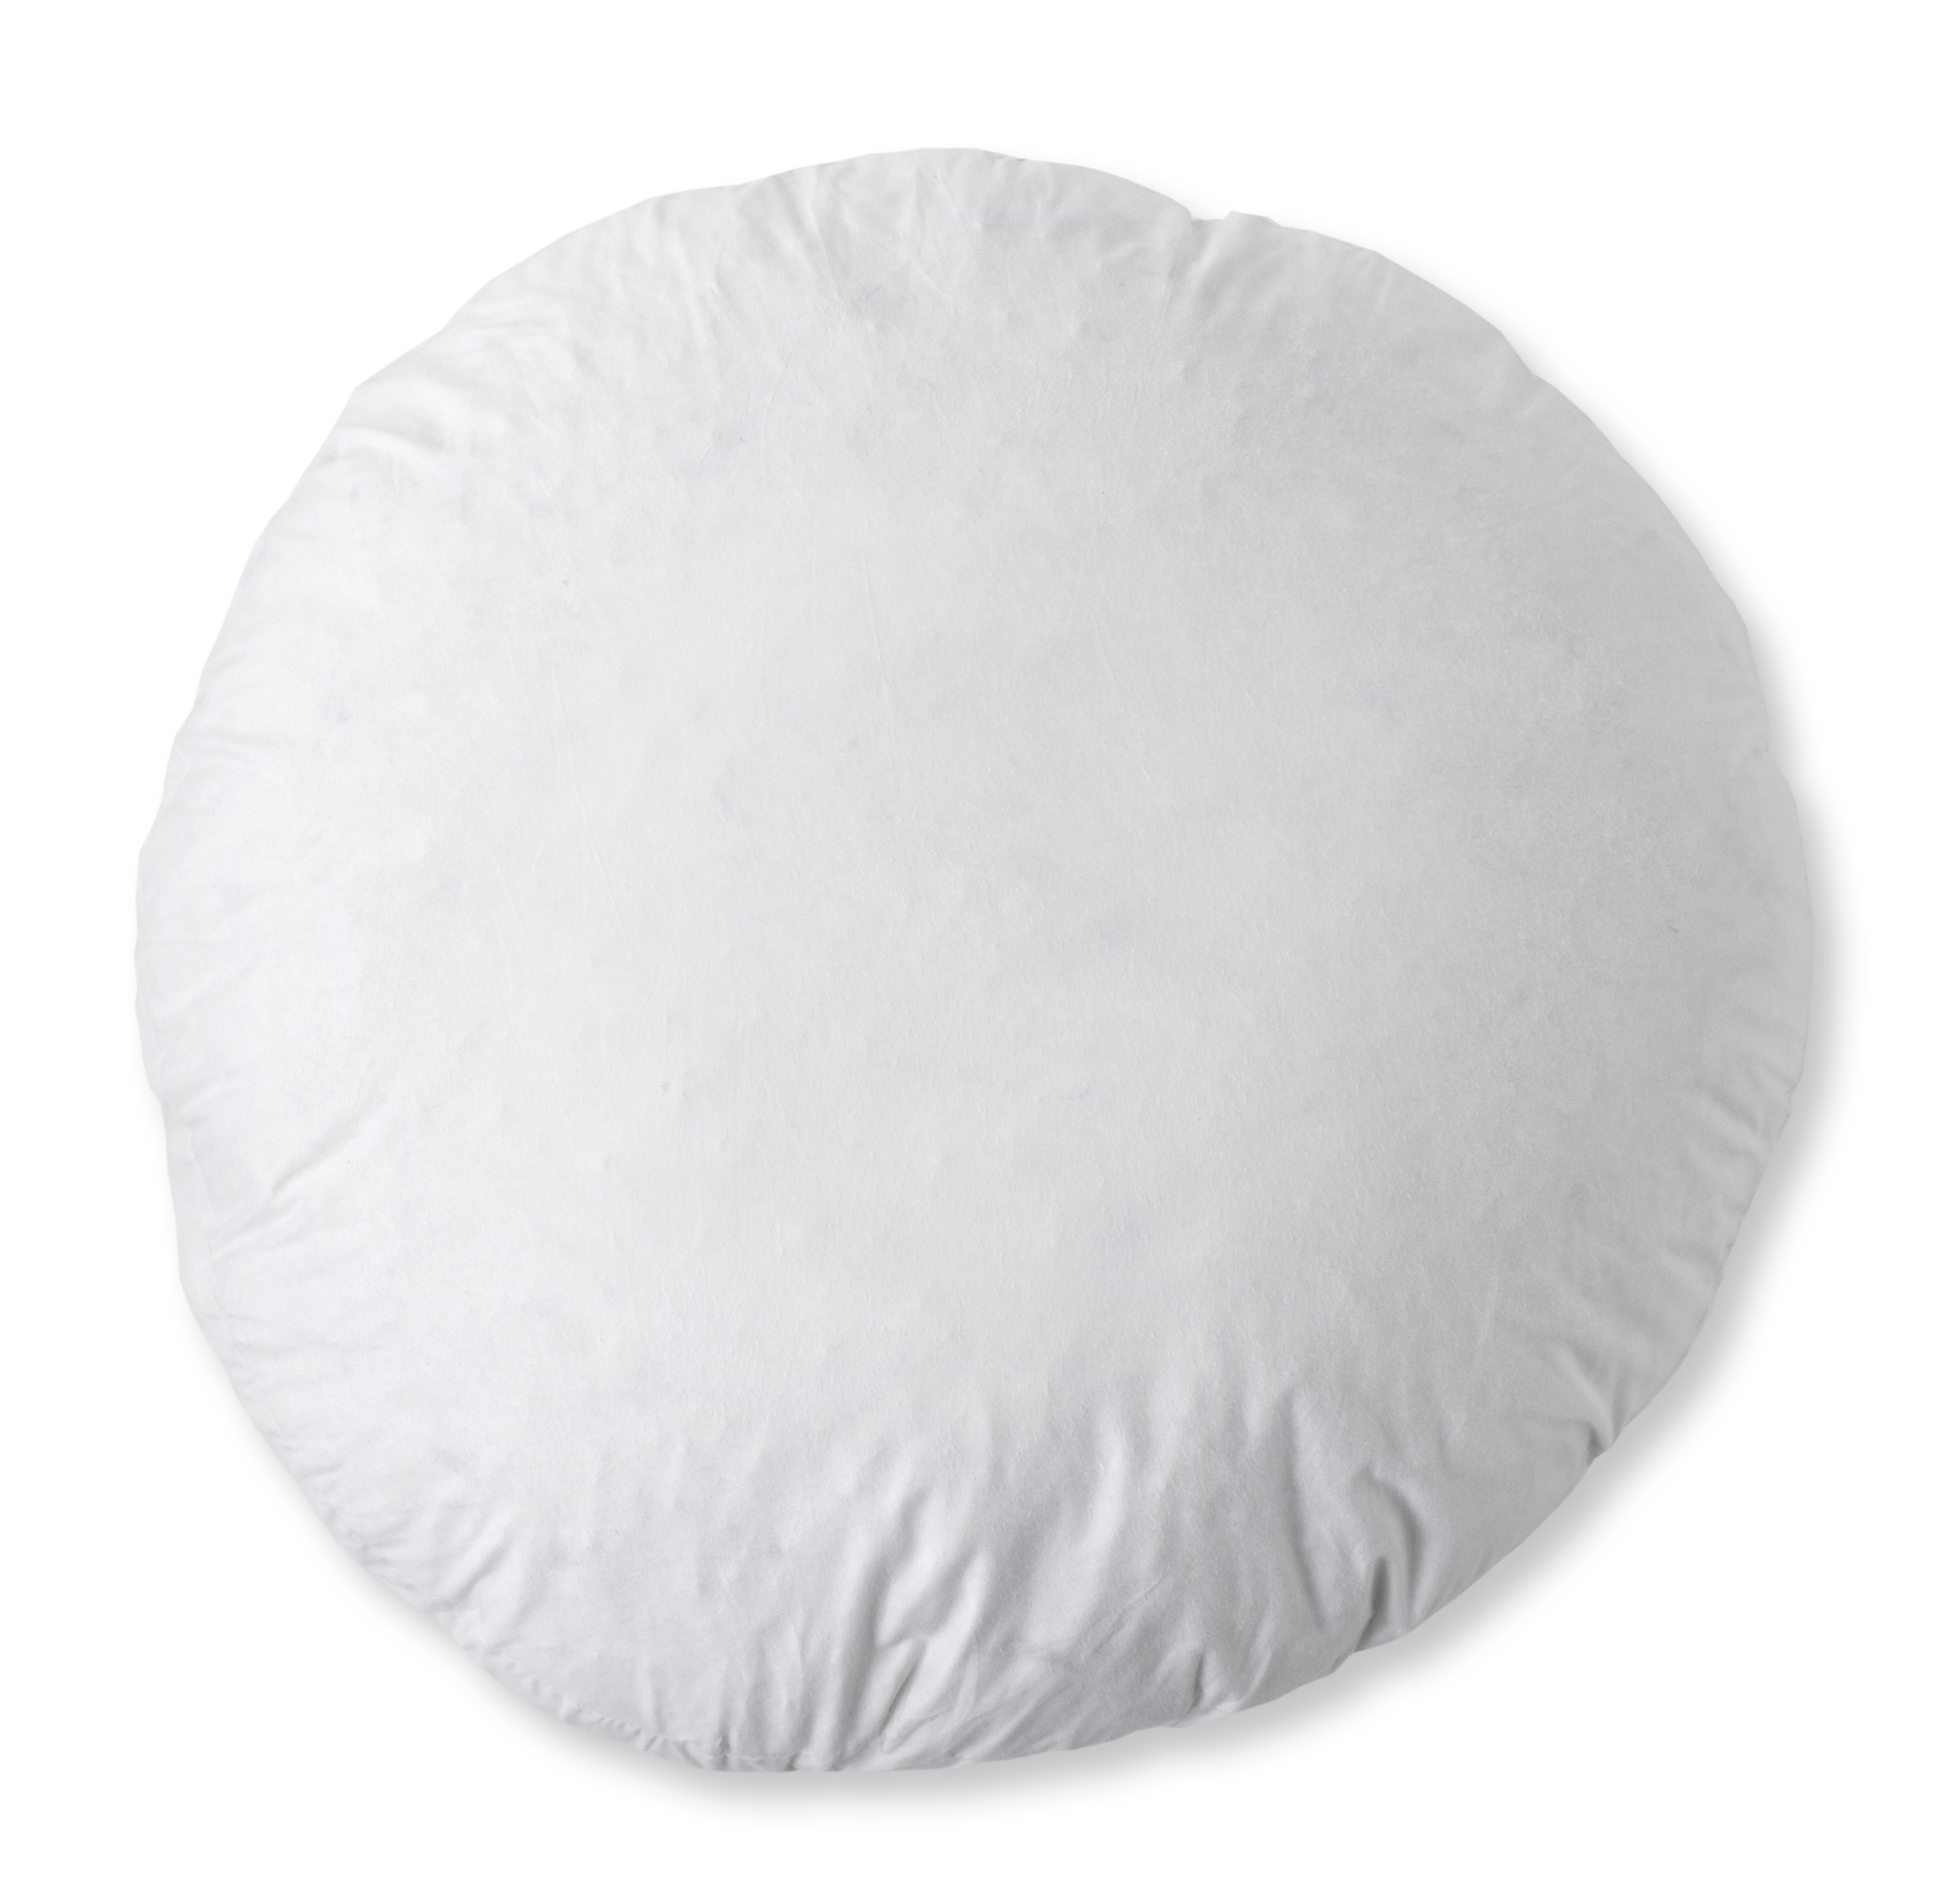 Pillow Insert 95/5 Feather/Down 20" Round